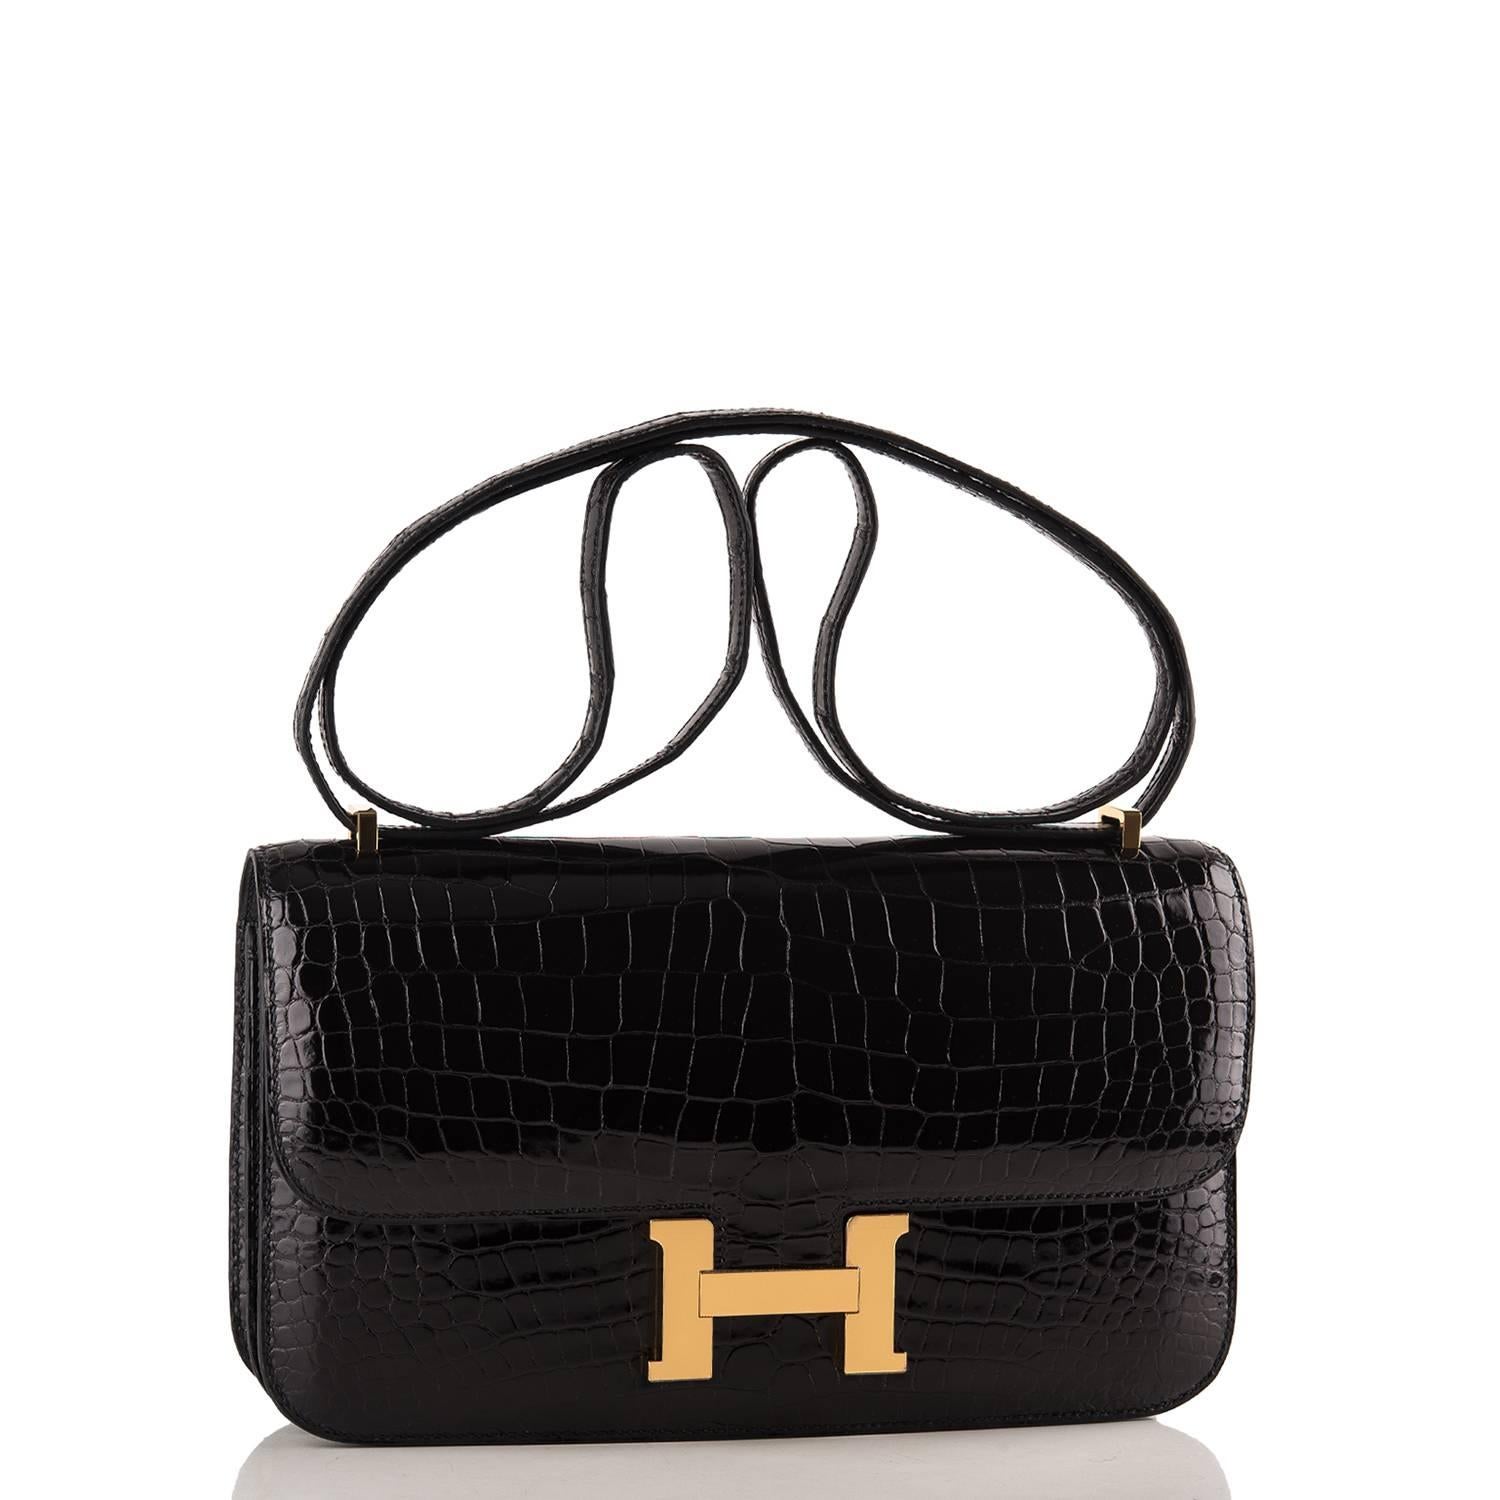 Hermes Black Constance Elan 25cm in porosus crocodile with gold hardware.

This classic Hermes style features tonal stitching, gold hardware, a metal 